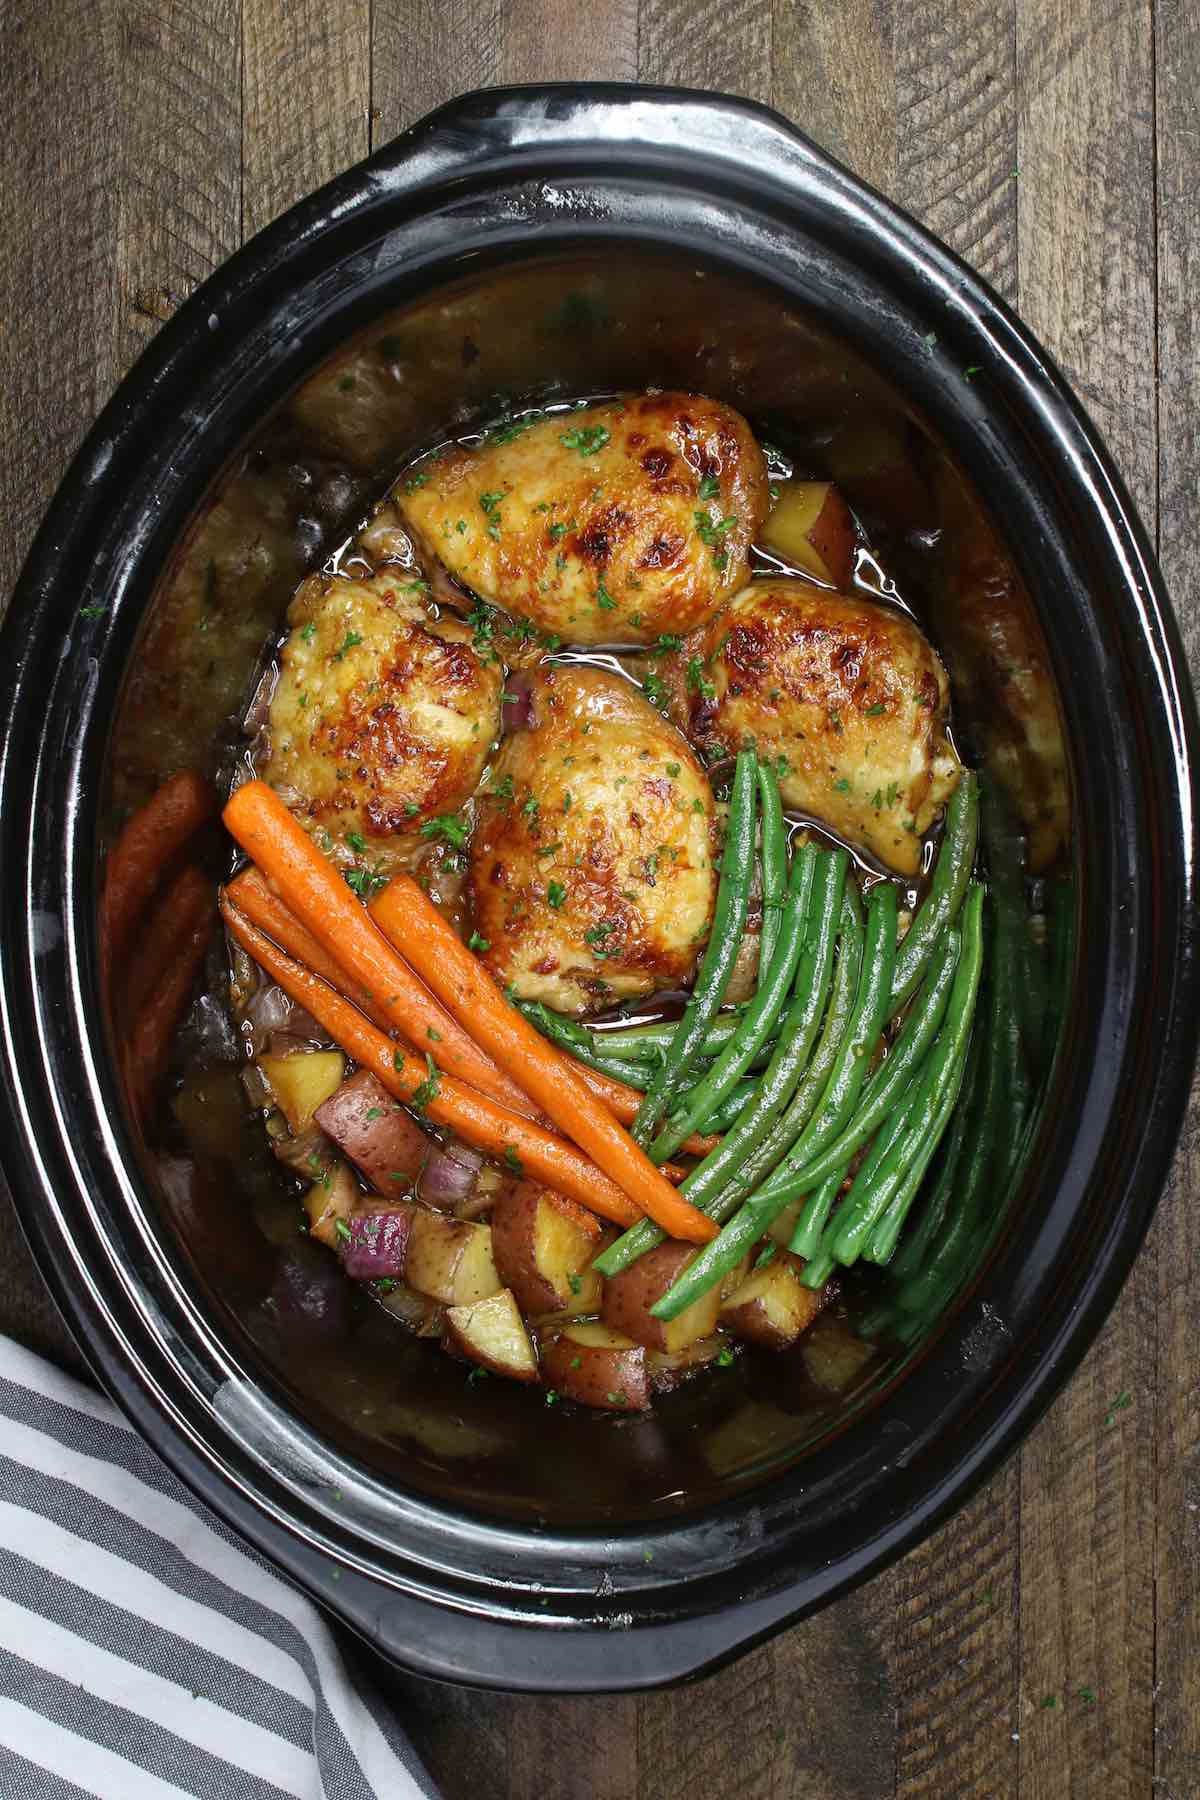 Making honey garlic chicken thighs with vegetables in the slow cooker